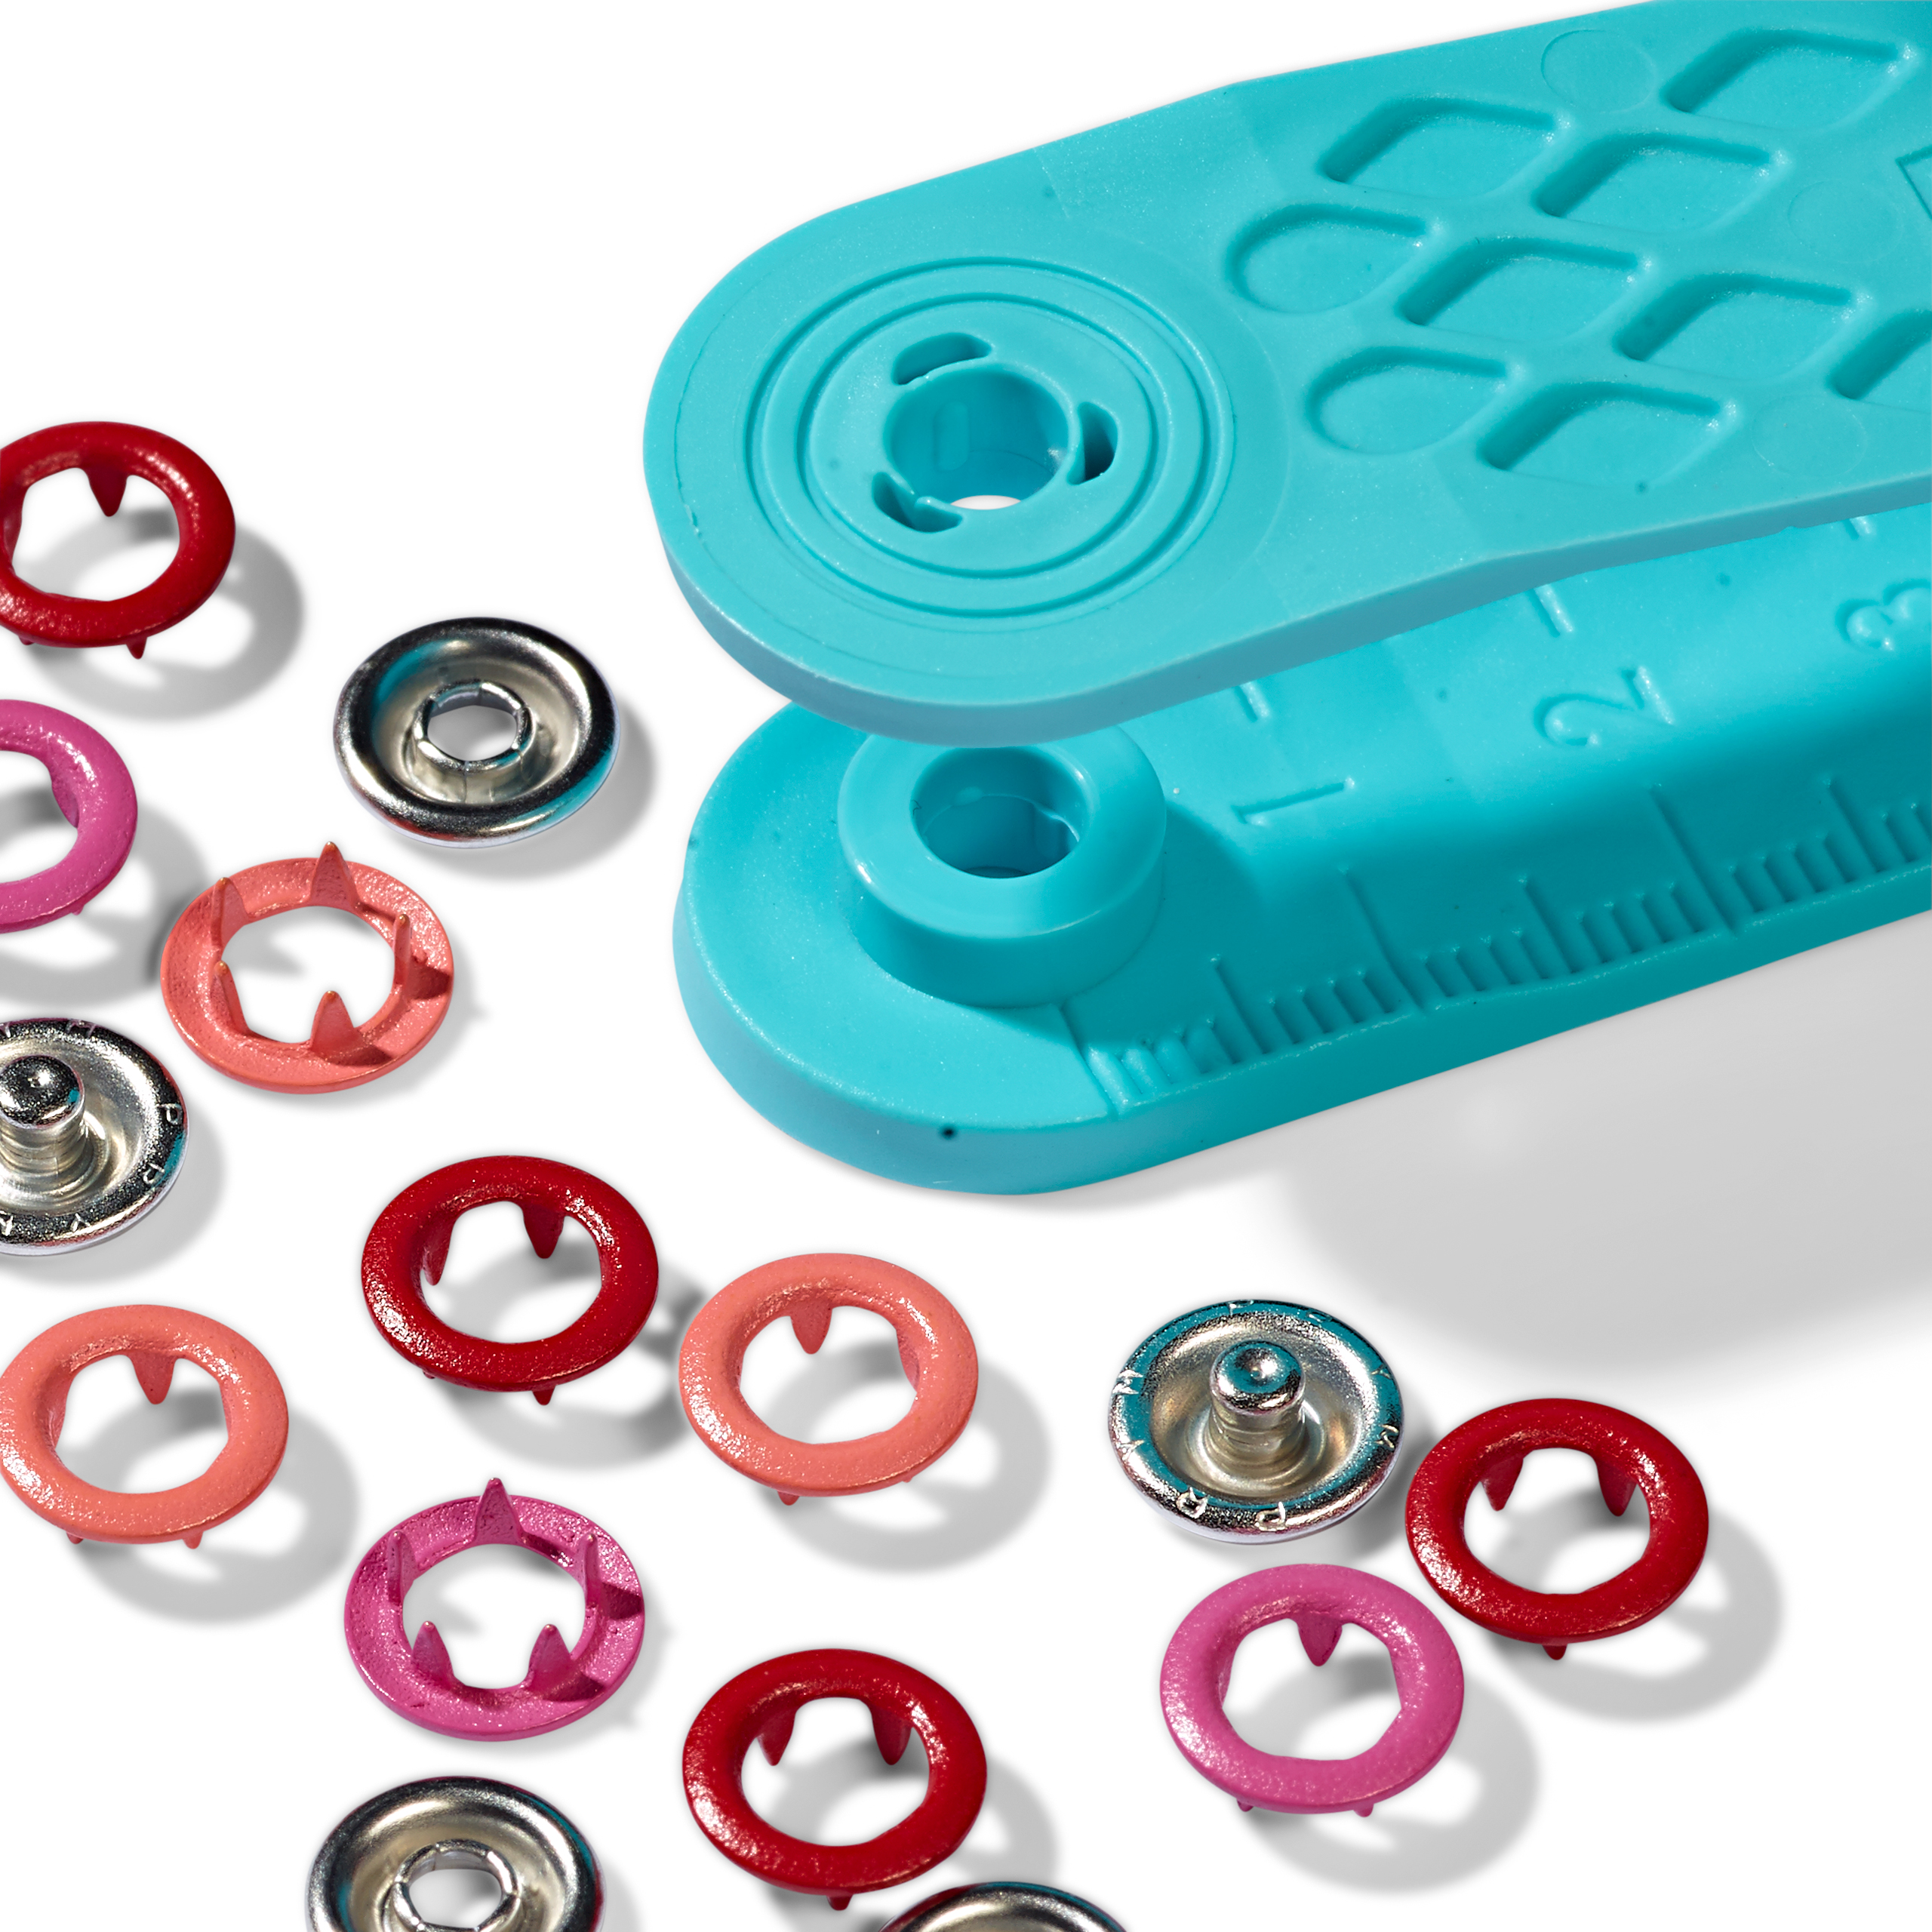 Boutons pression Jersey Color - 390701